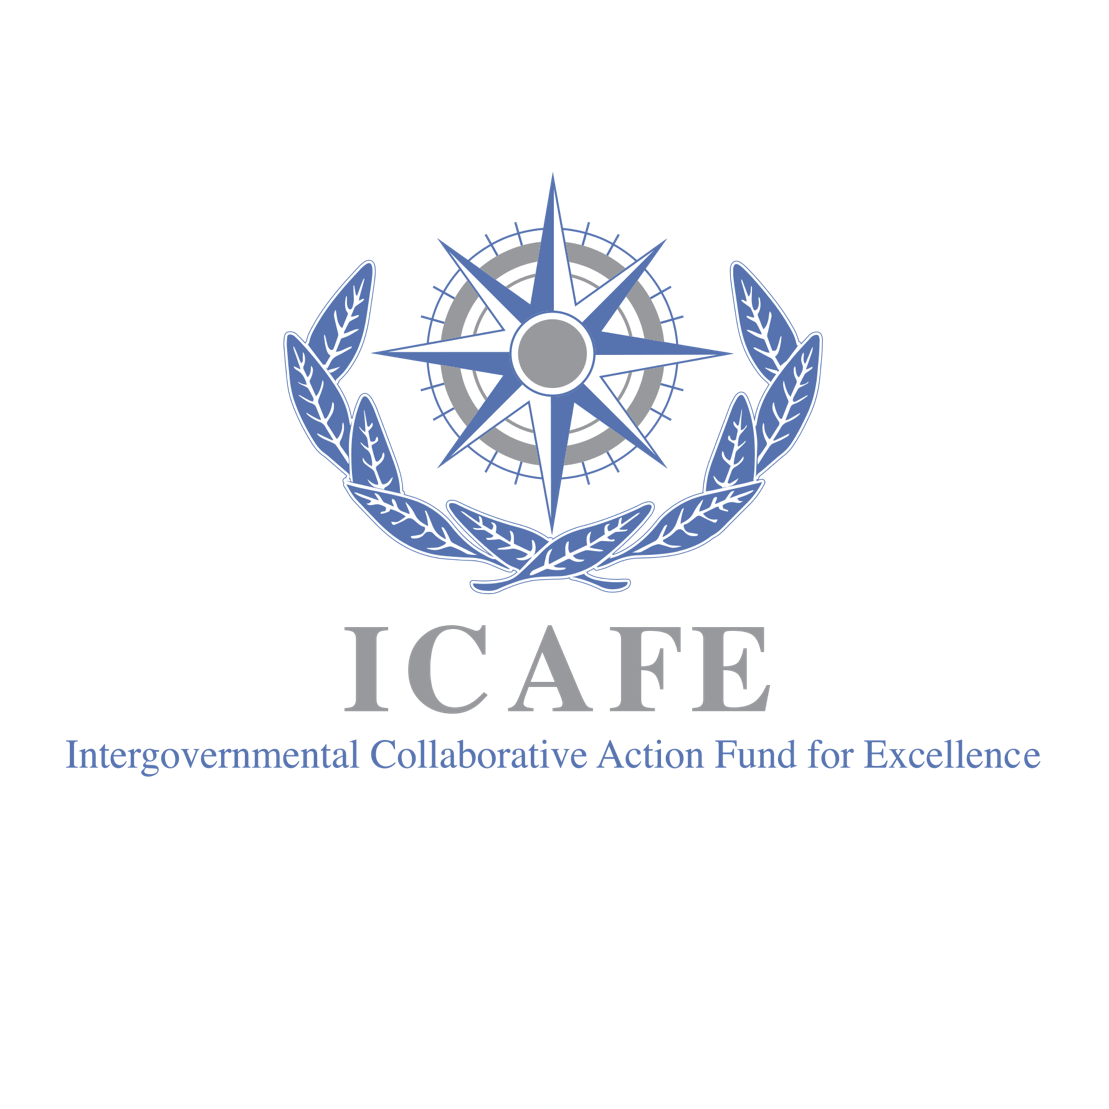 Intergovernmental Collaborative Action Fund for Excellence